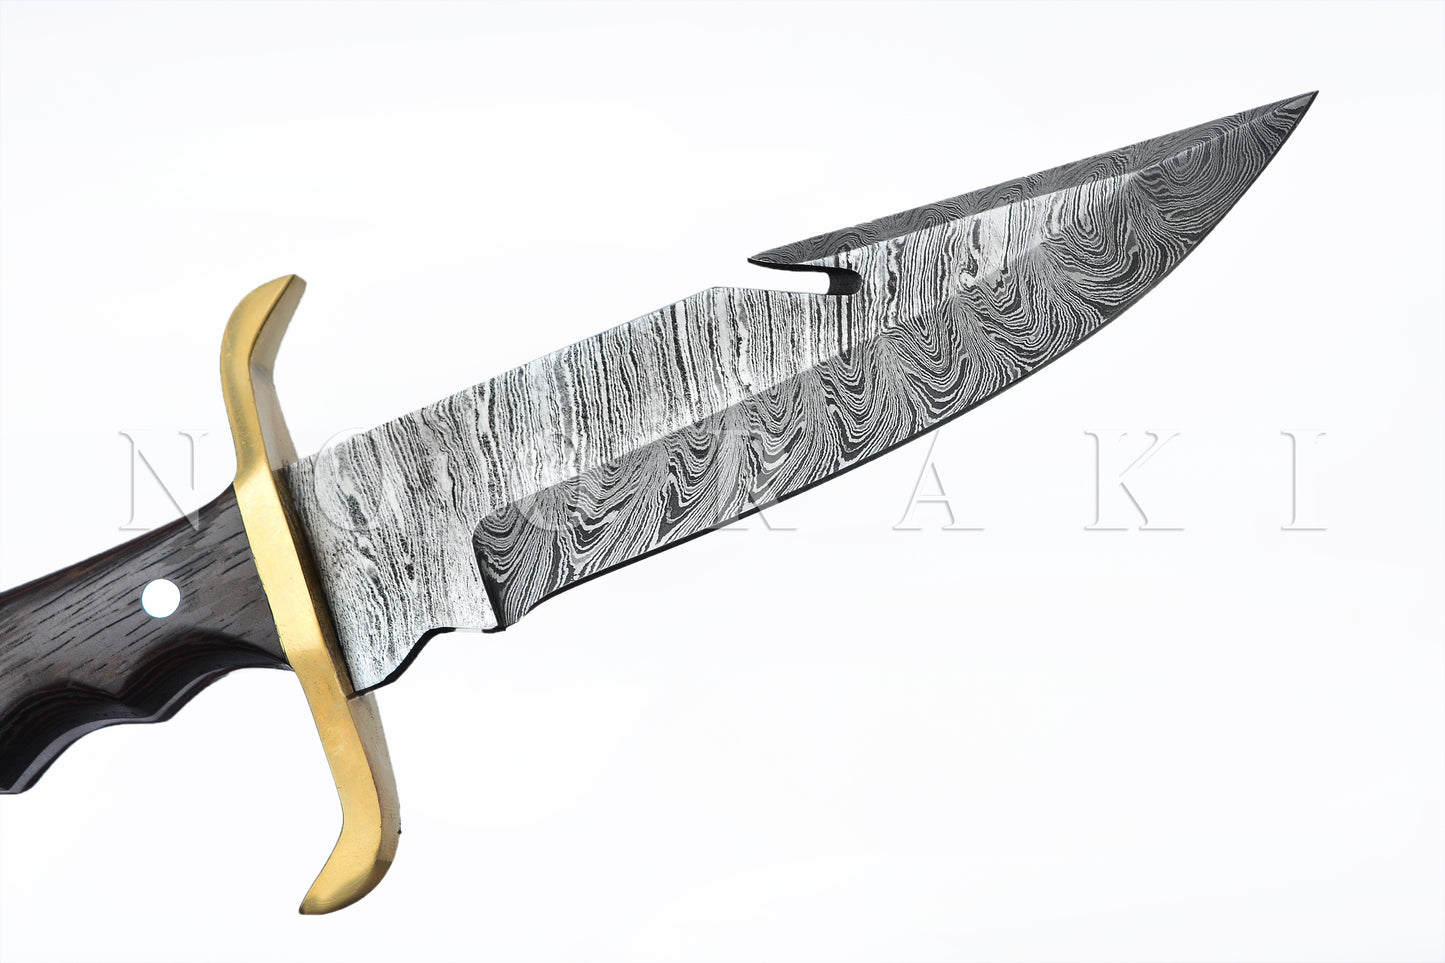 The Damascus Hunter: A 12" Full Tang Masterpiece for Survival and Adventure"